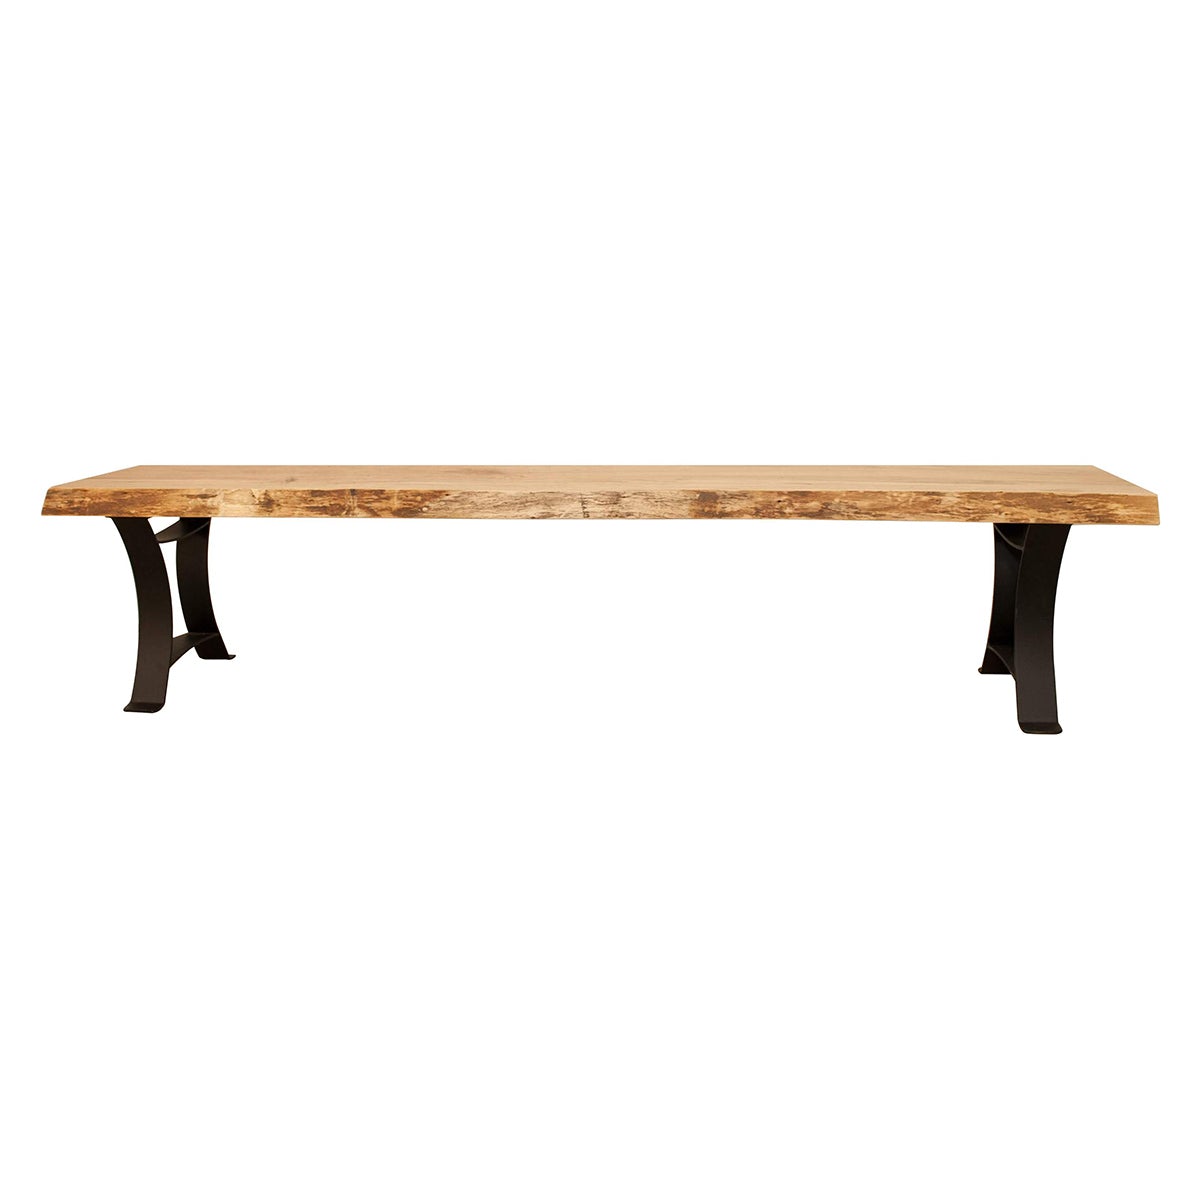 Maple Live Edge Bench with Steel Base